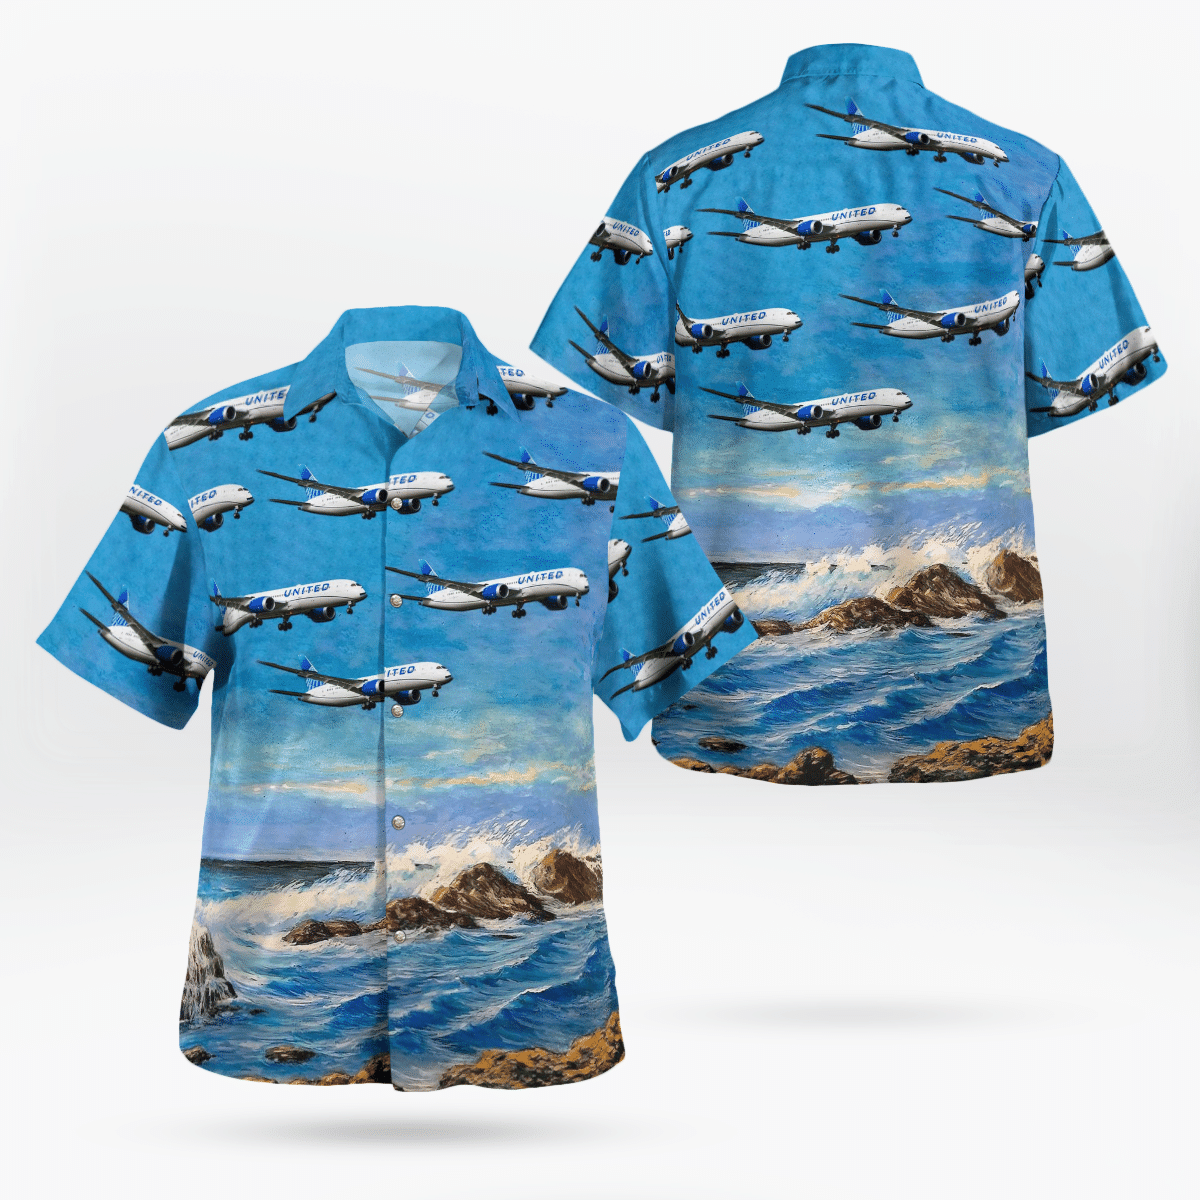 HOT United Airlines Boeing 787-9 Dreamliner Tropical Shirt1